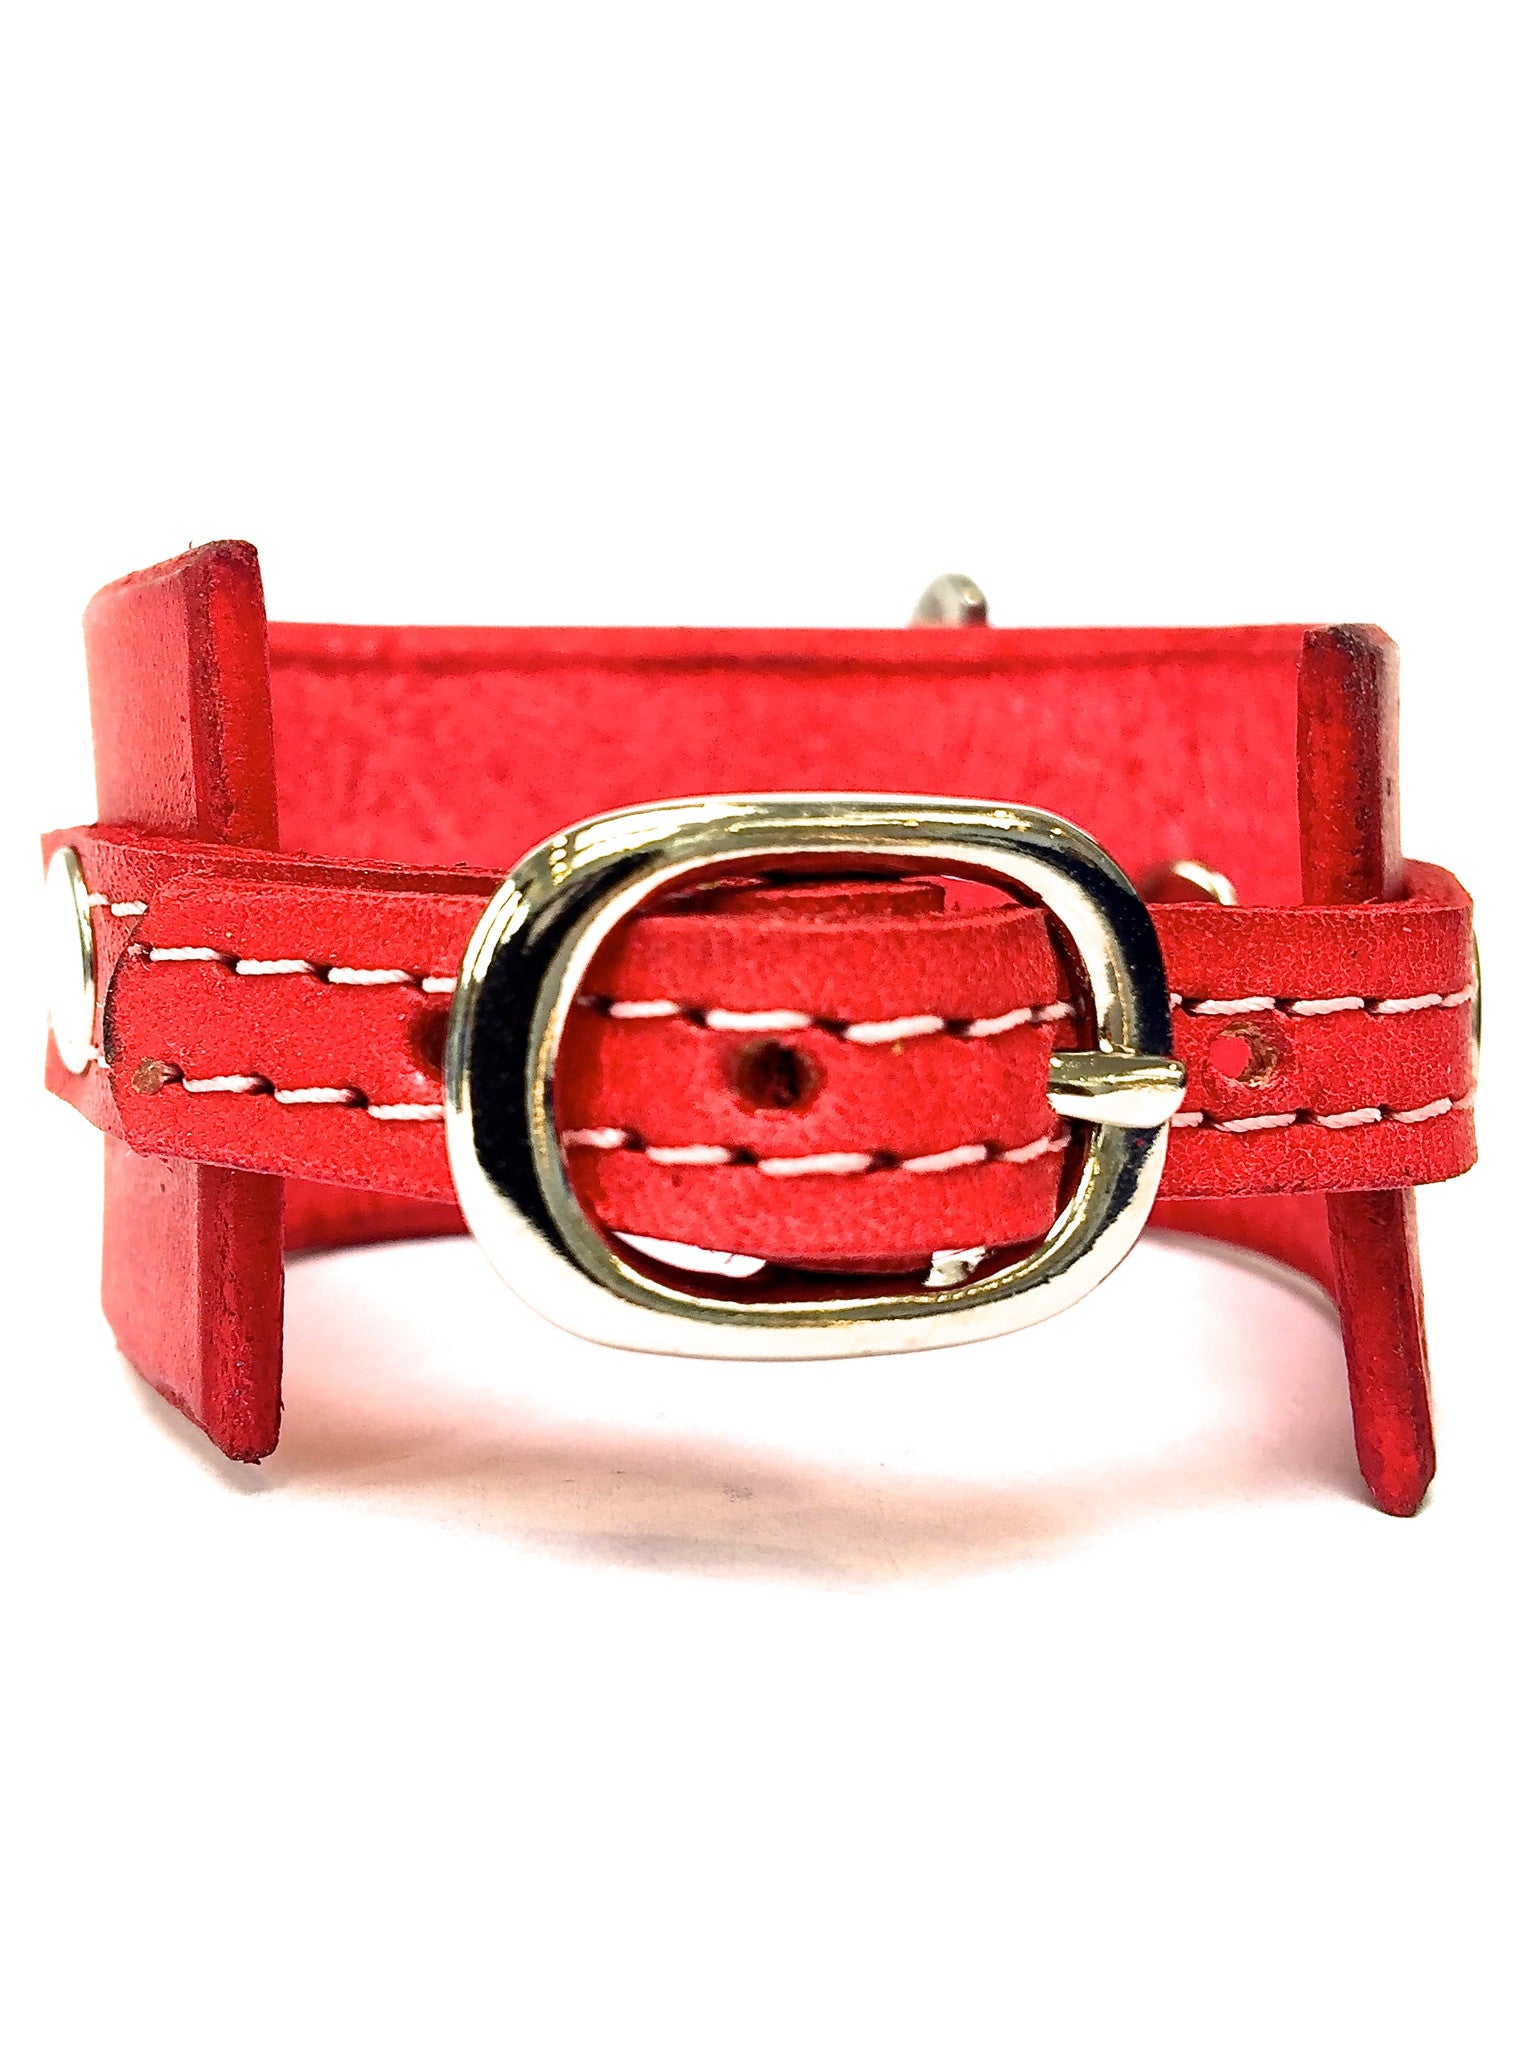 leather cuff with anchor shackle red by nyet jewelry.